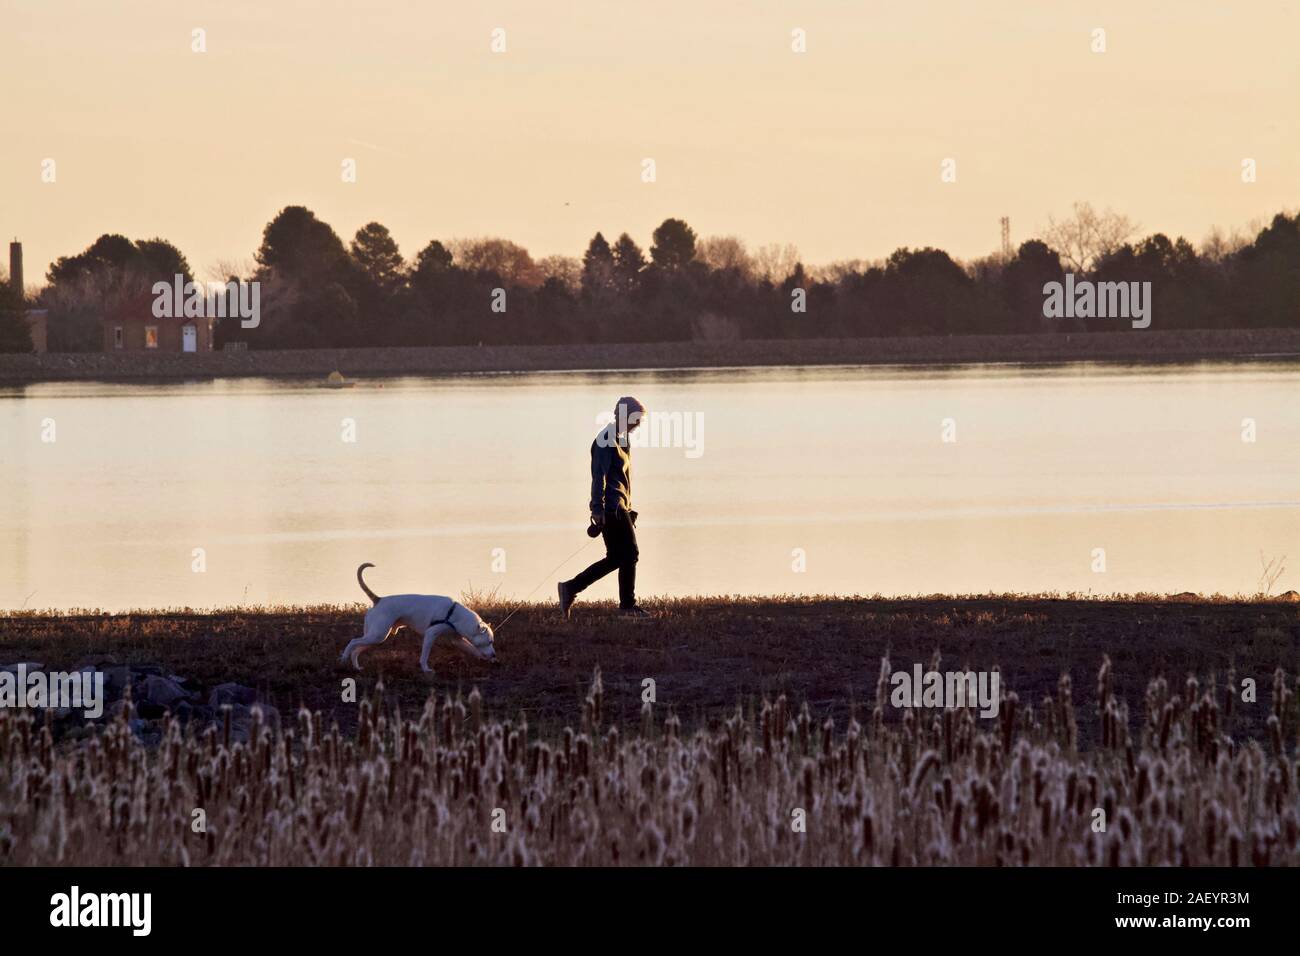 An individual lady walks her large white dog along the bank of a lake in the early morning light. Stock Photo